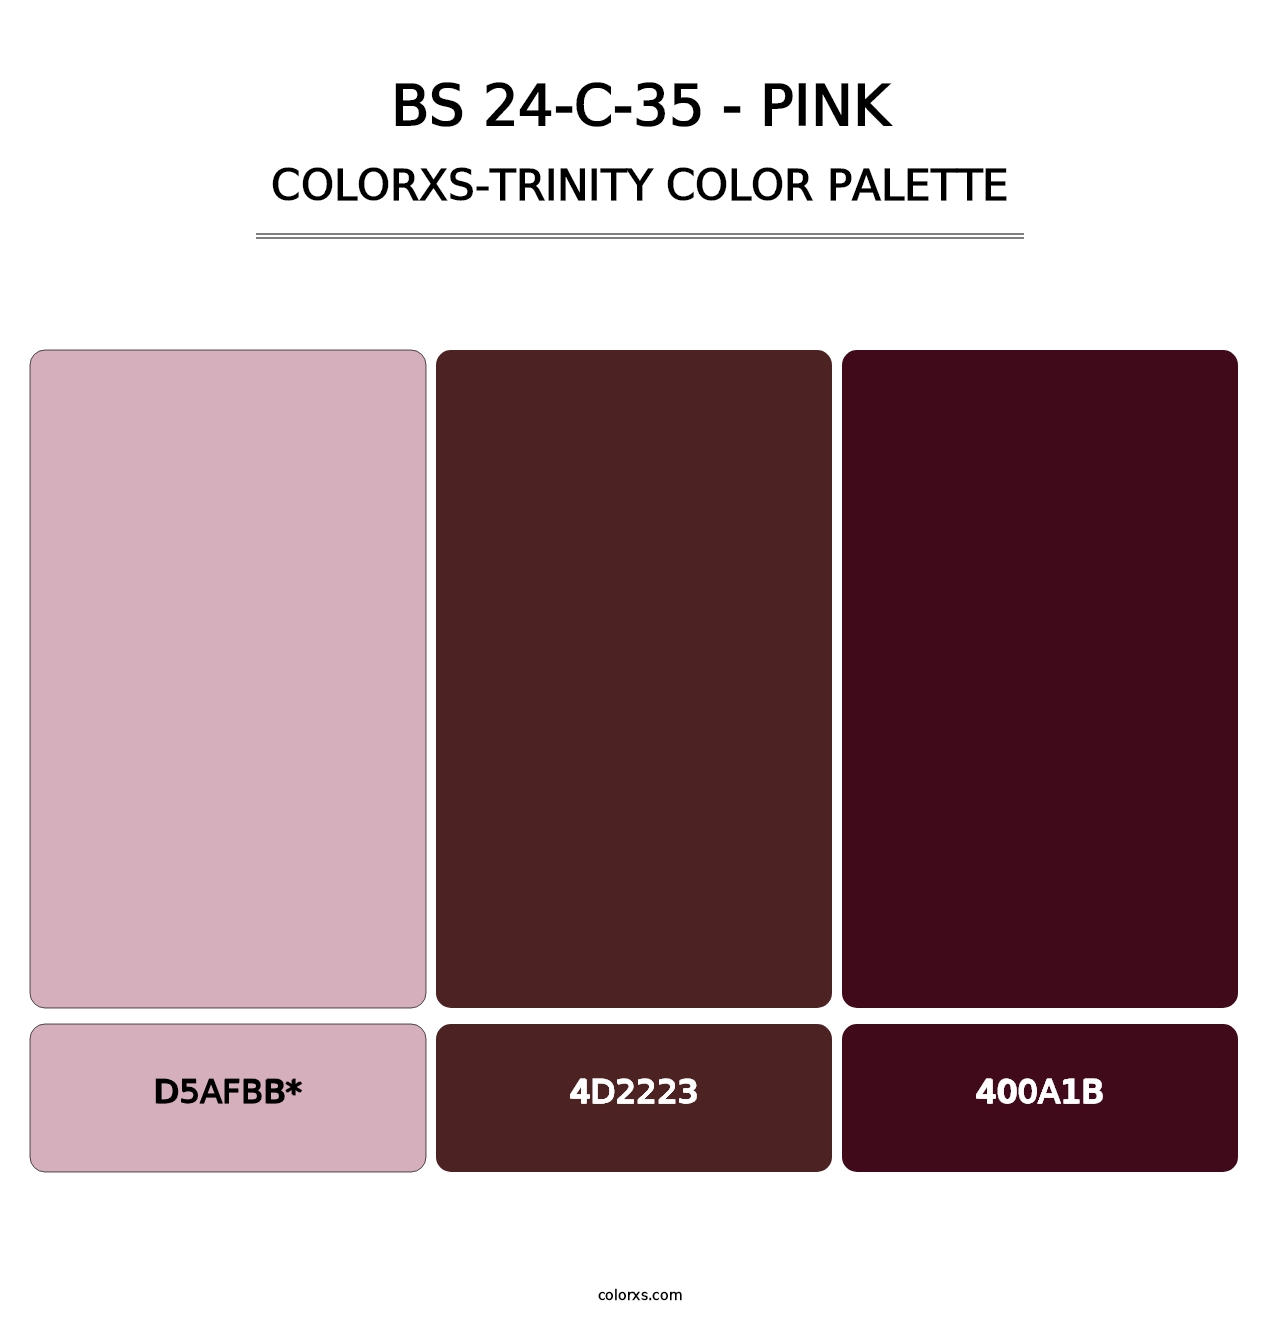 BS 24-C-35 - Pink - Colorxs Trinity Palette